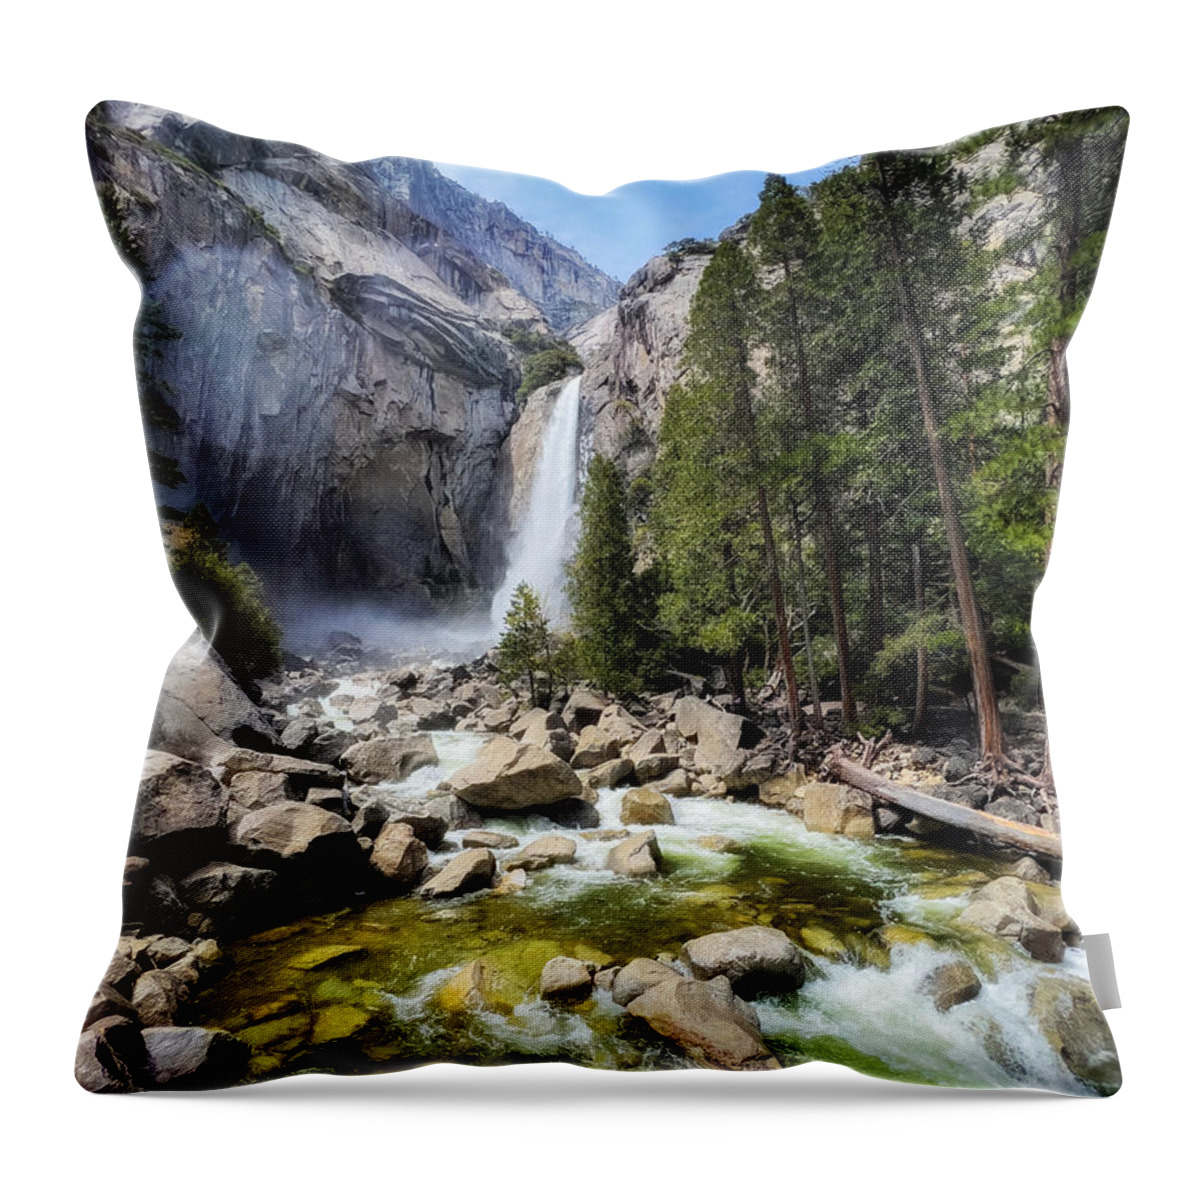 Photograph Throw Pillow featuring the photograph Lower Yosemite Falls California by John A Rodriguez